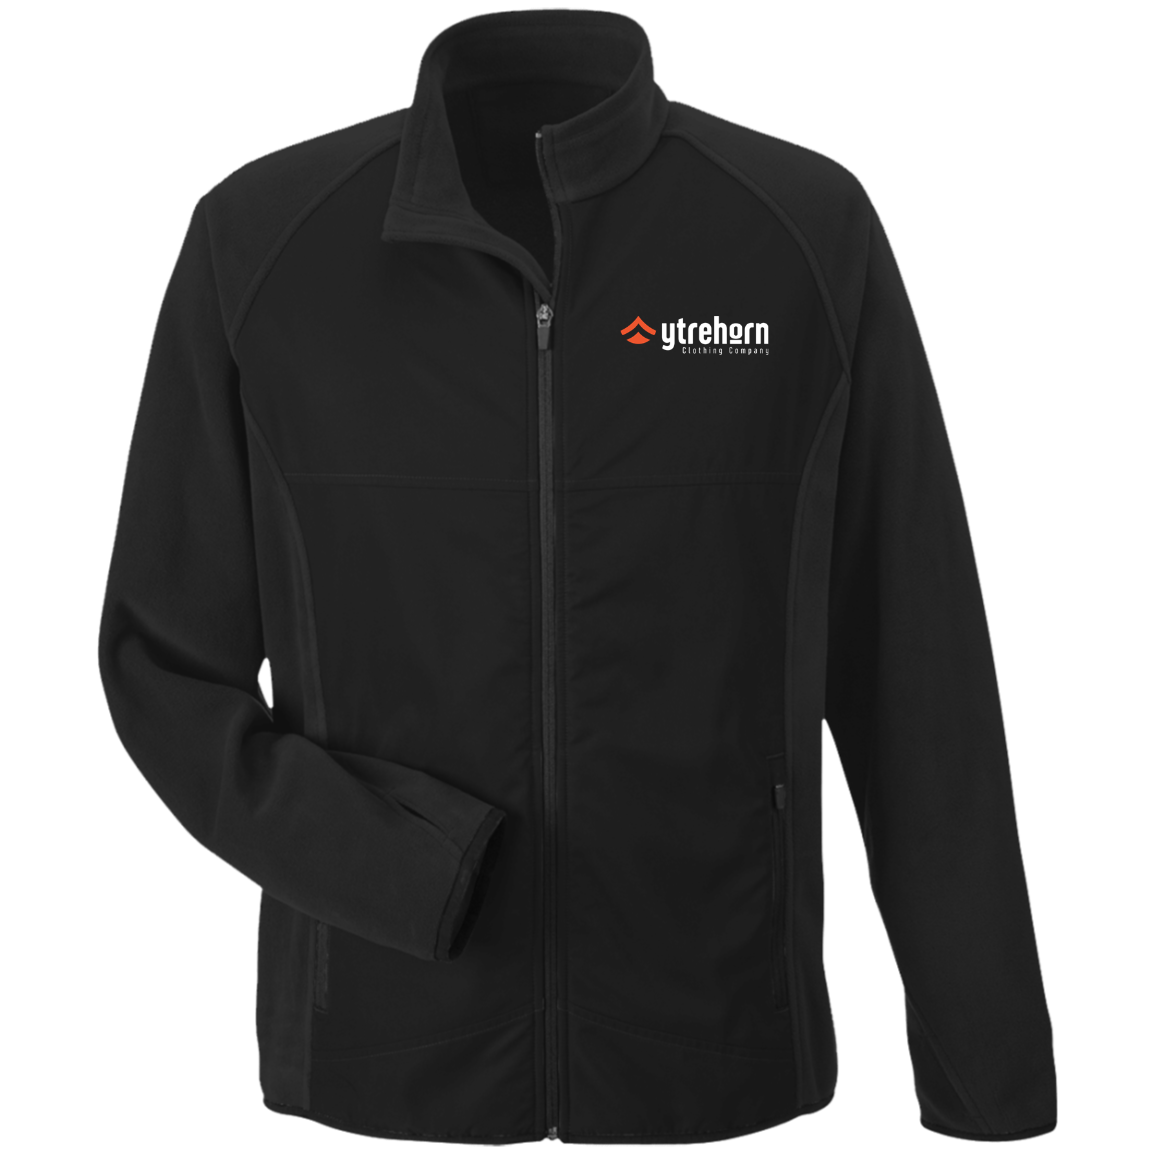 TT92 Team 365 Microfleece with Front Polyester Overlay